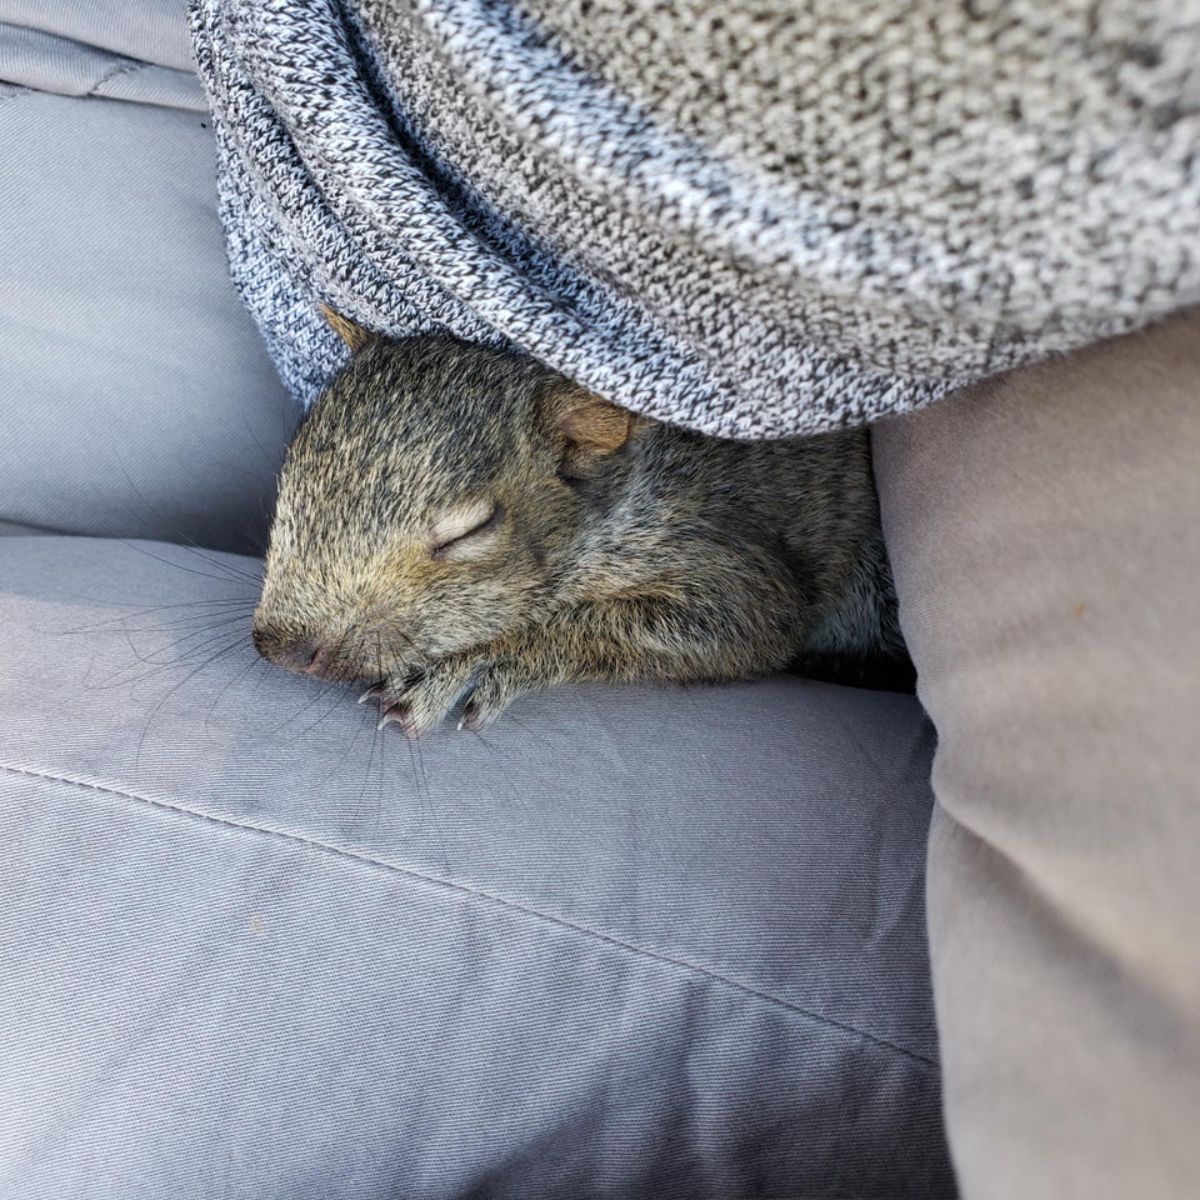 a grey baby squirrel sleeping on someone's lap